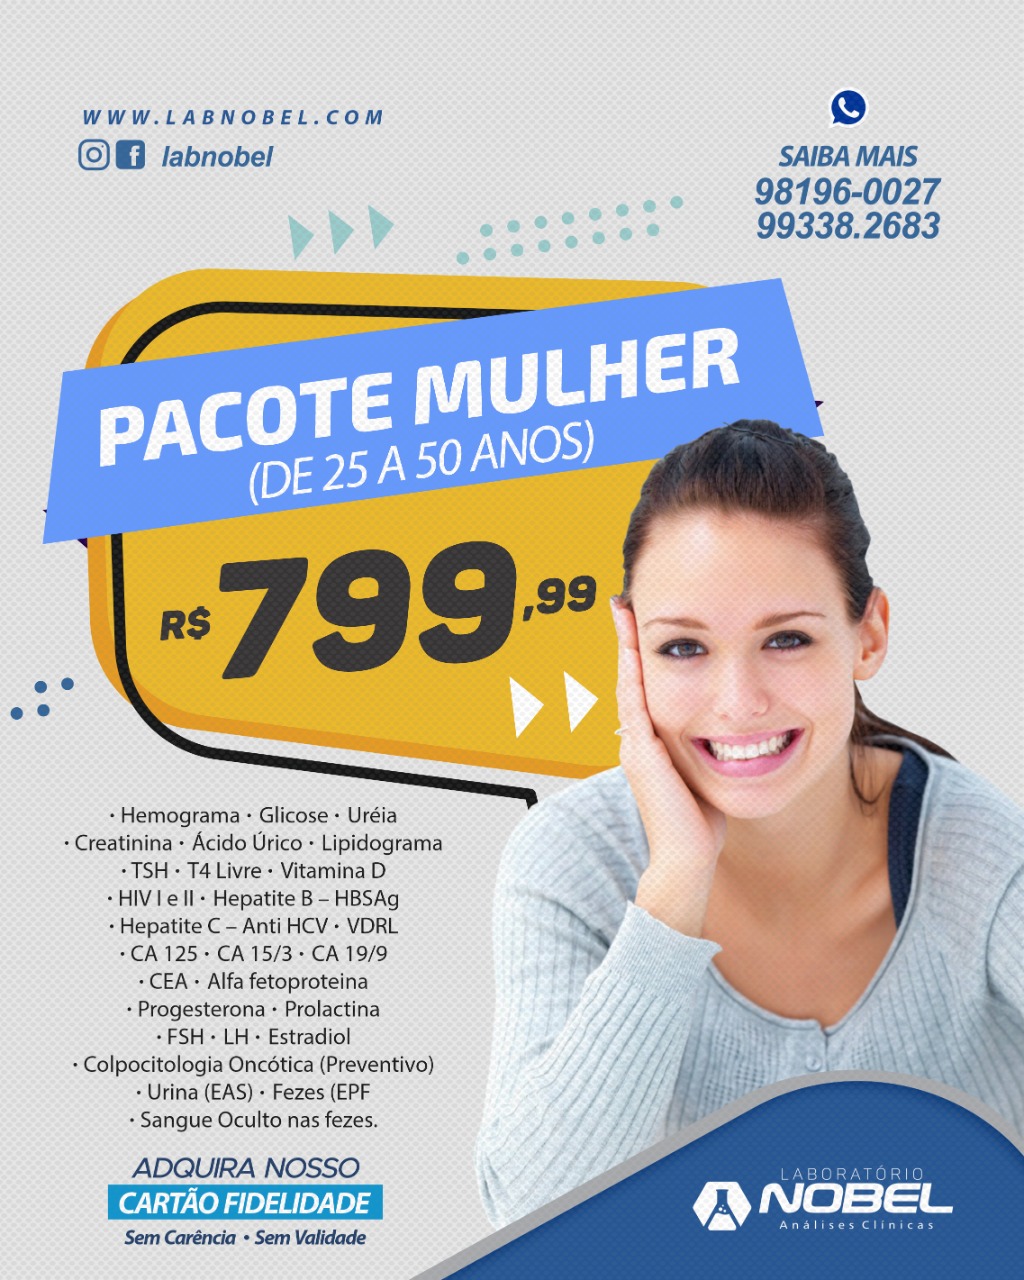 Pacote Mulher